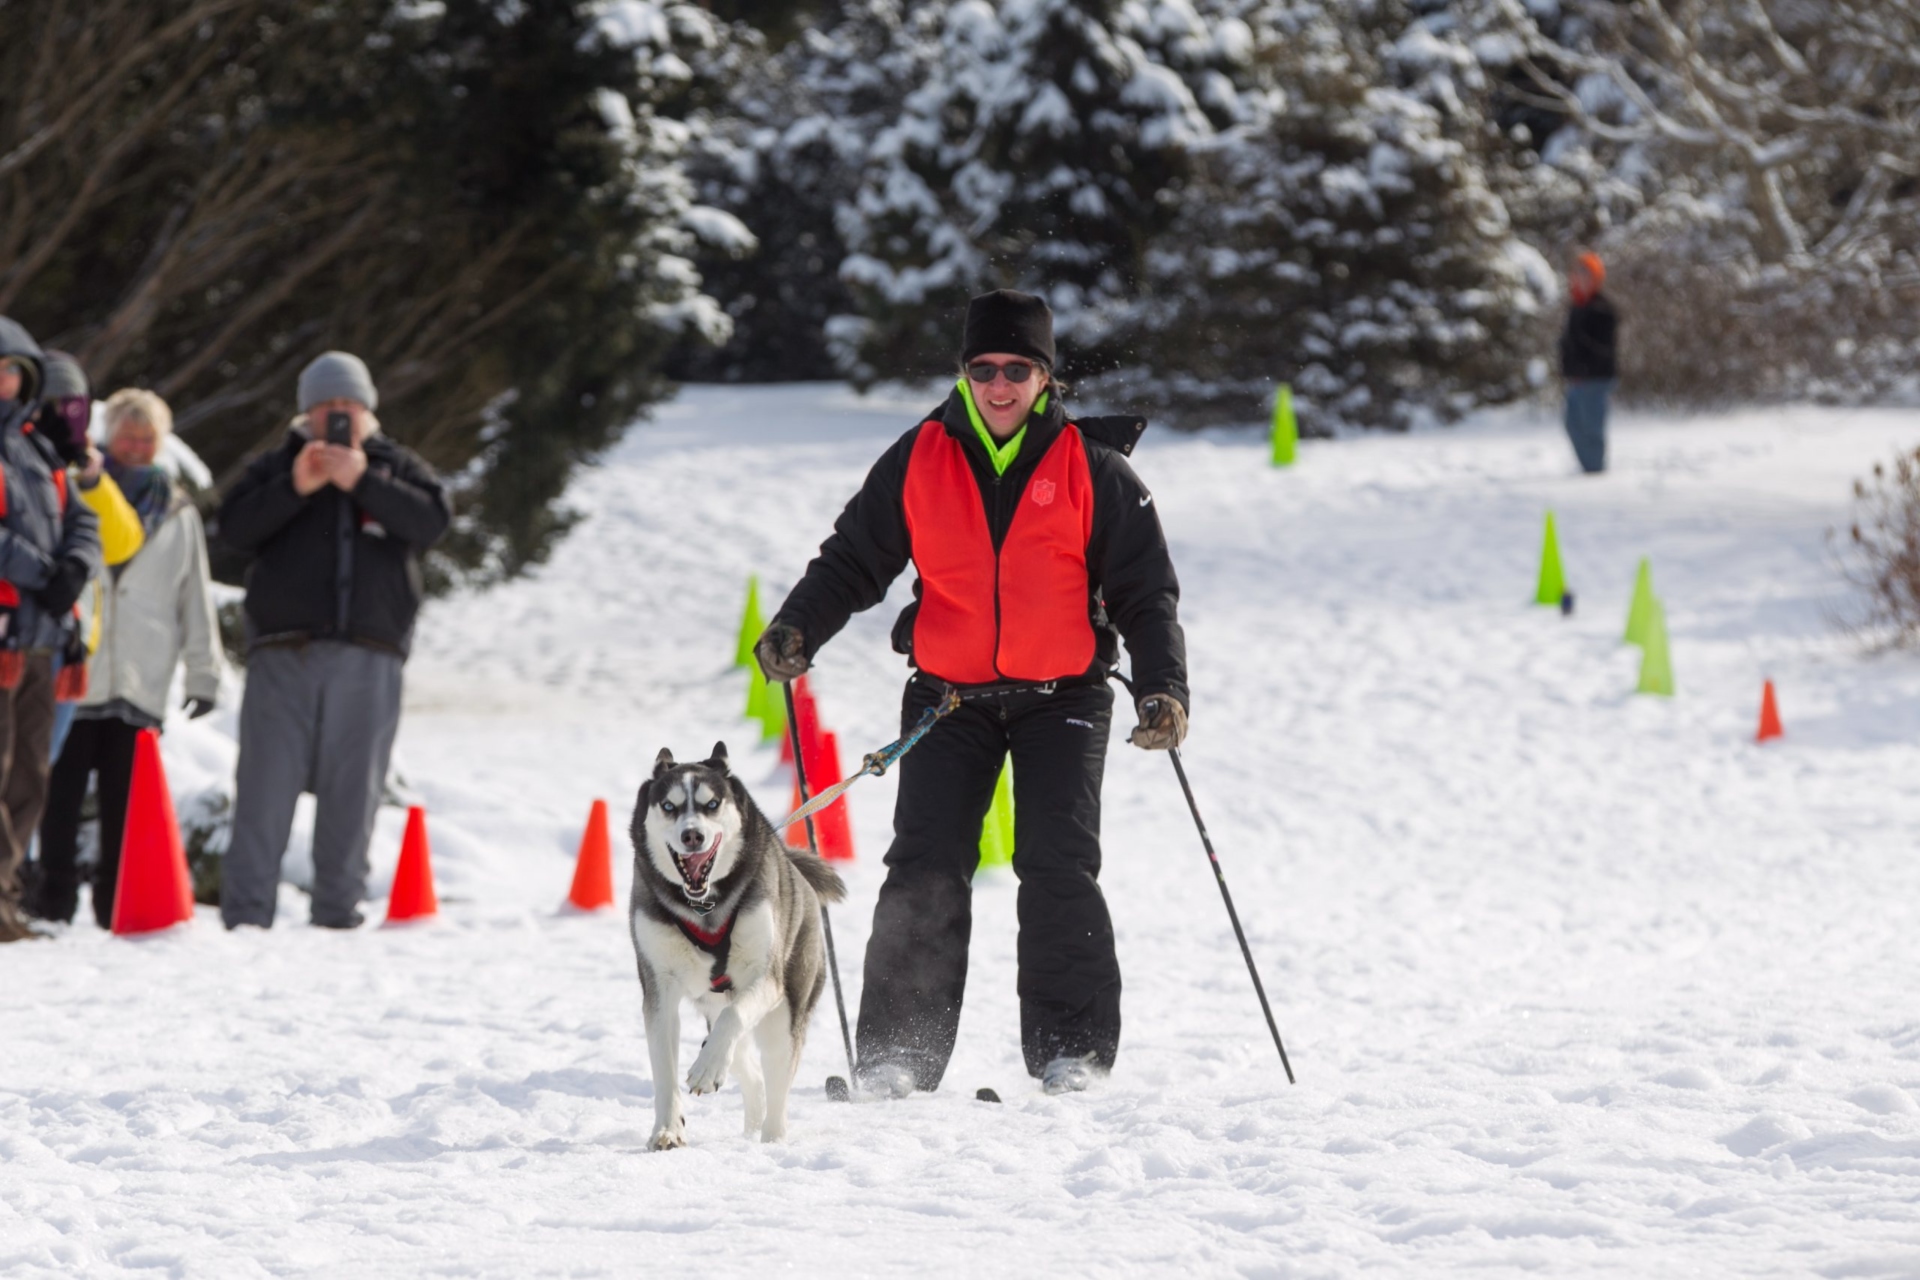 Dog pulls woman at the dog sled event